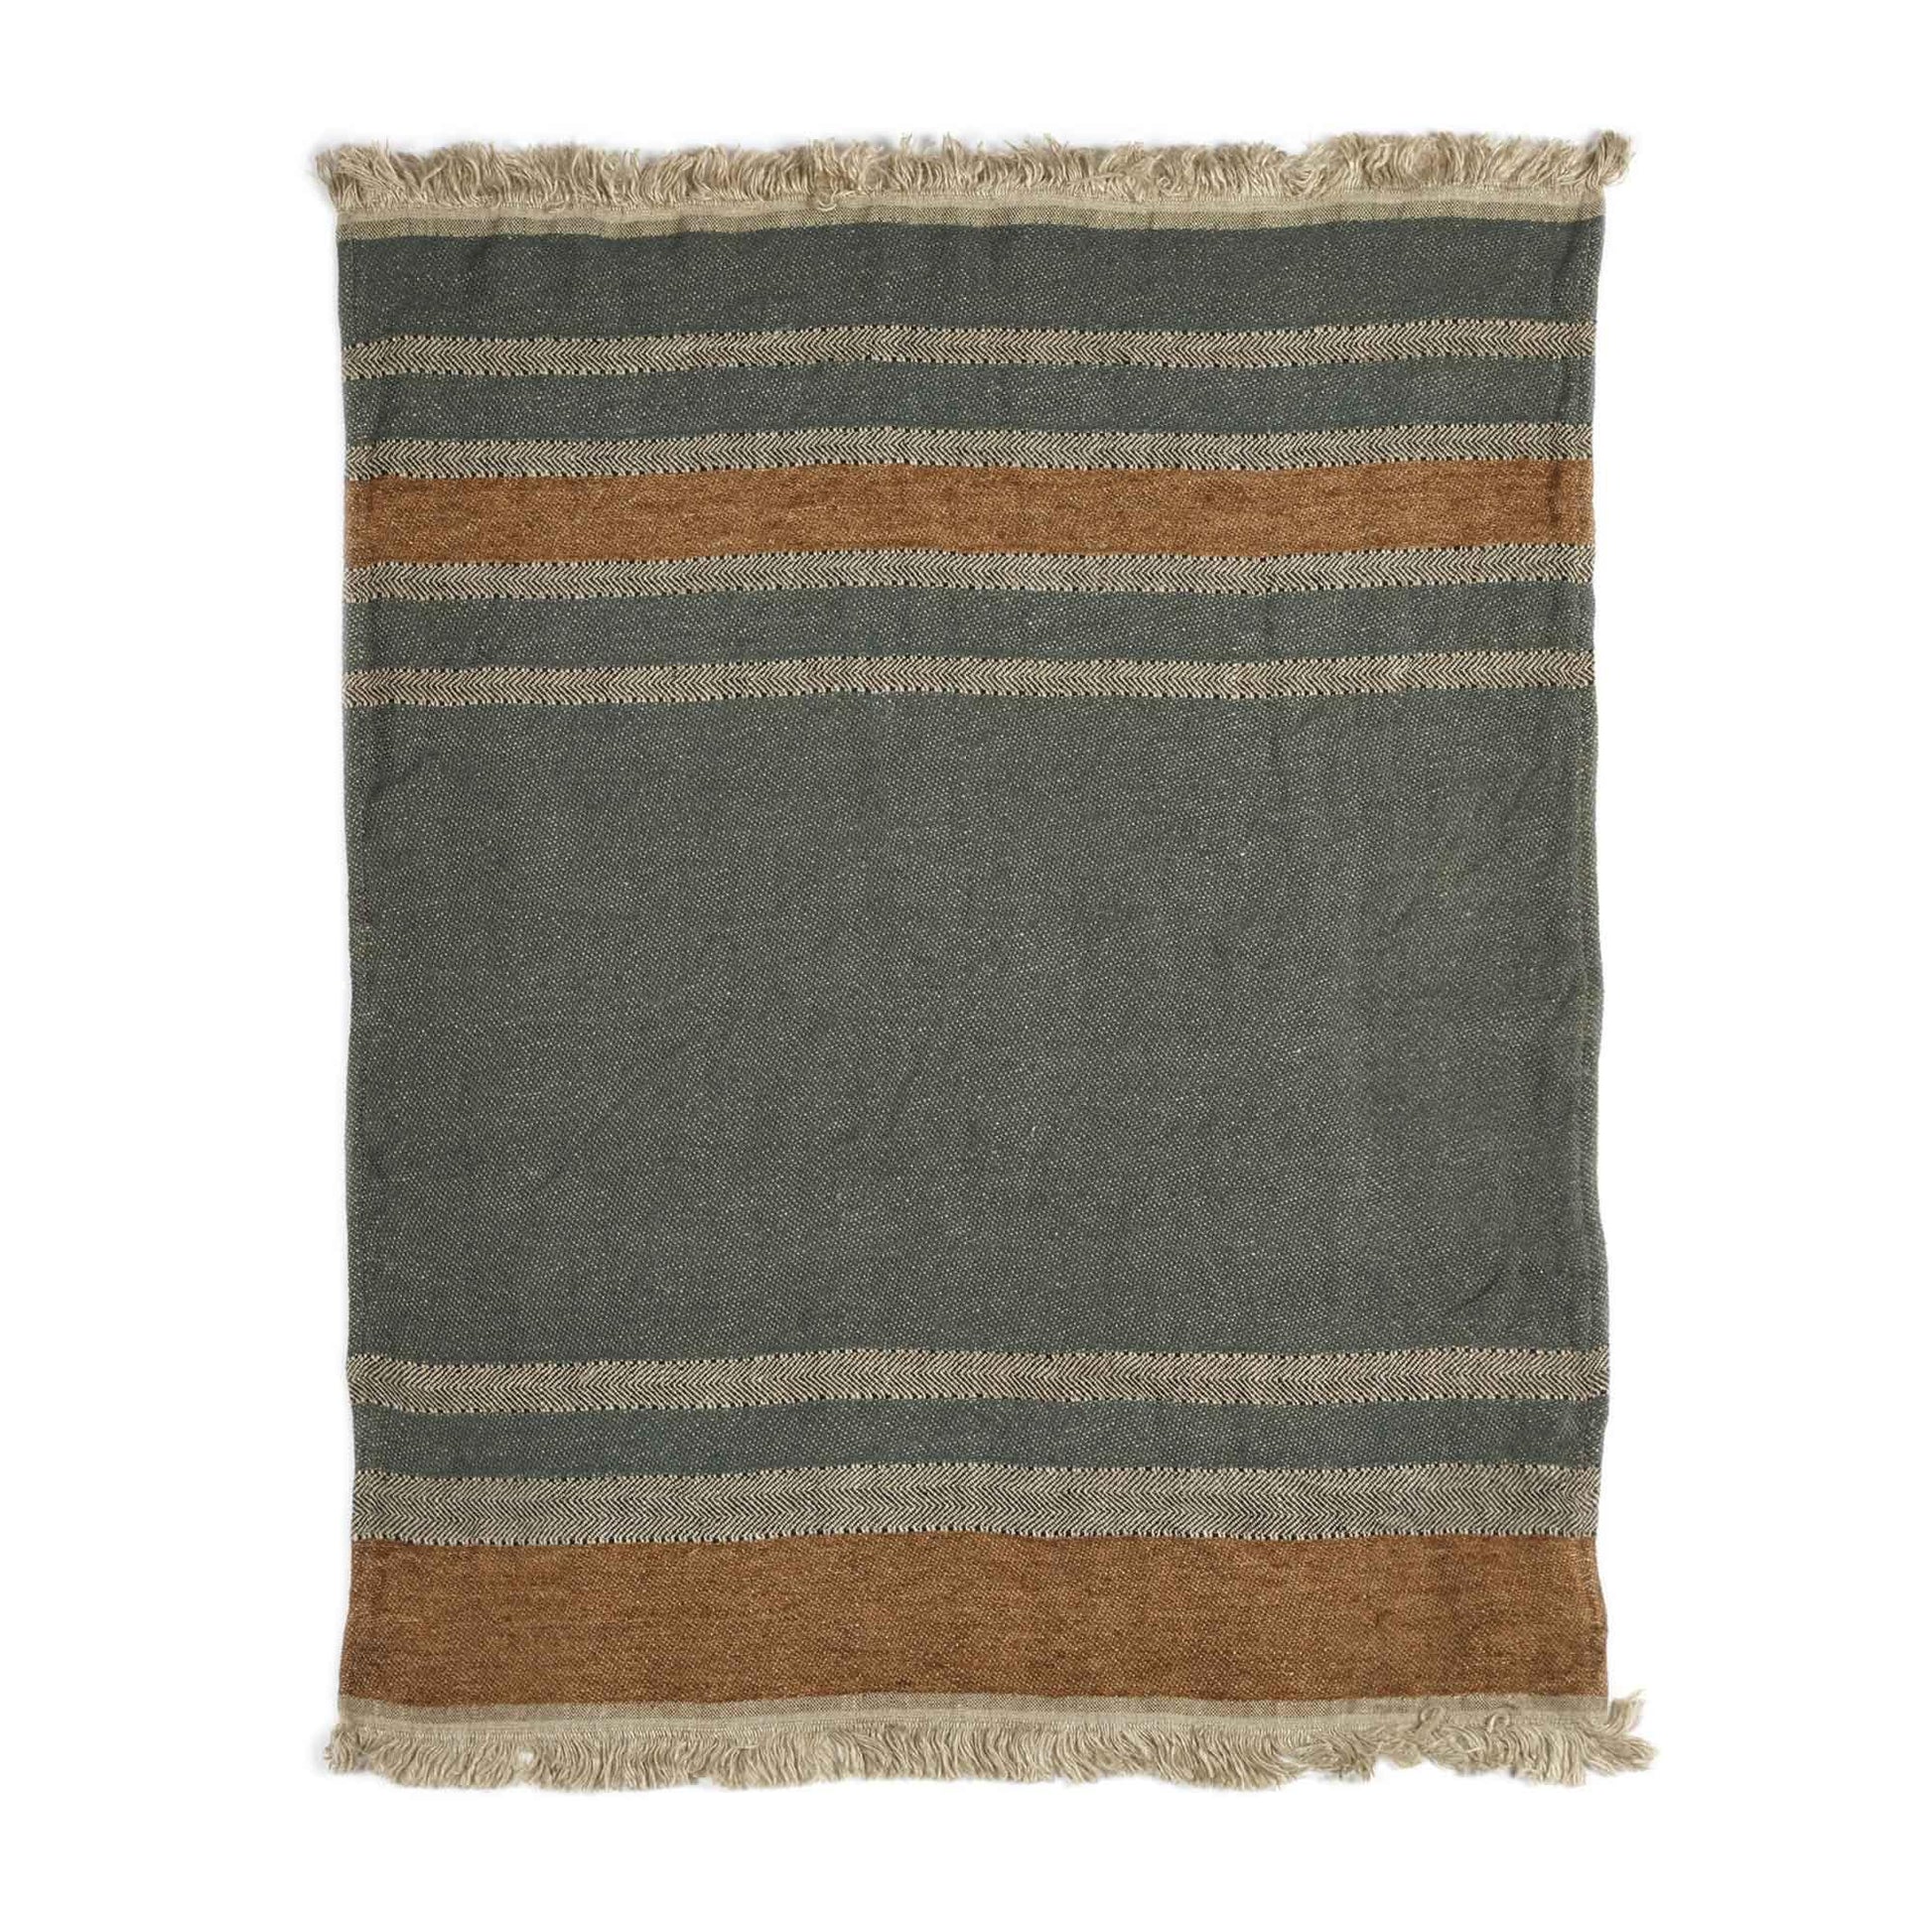 Belgian linen fouta throw blanket flat lay product shot in color Alouette by Libeco for South Hous.